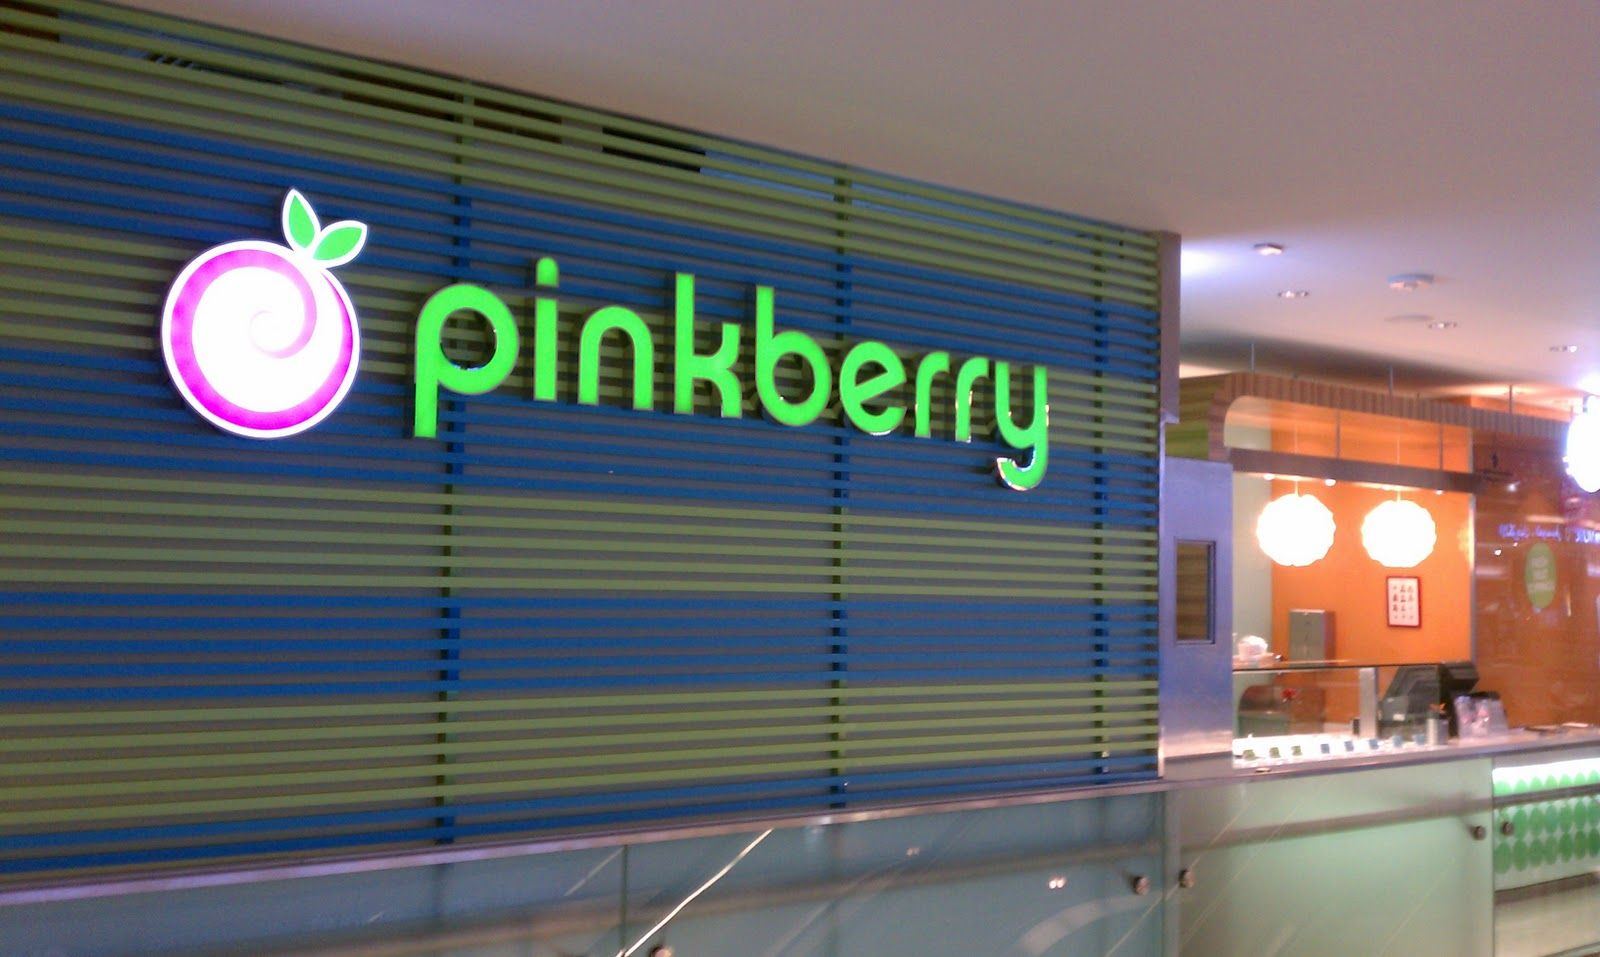 Pinkberry at the Dubai airport.